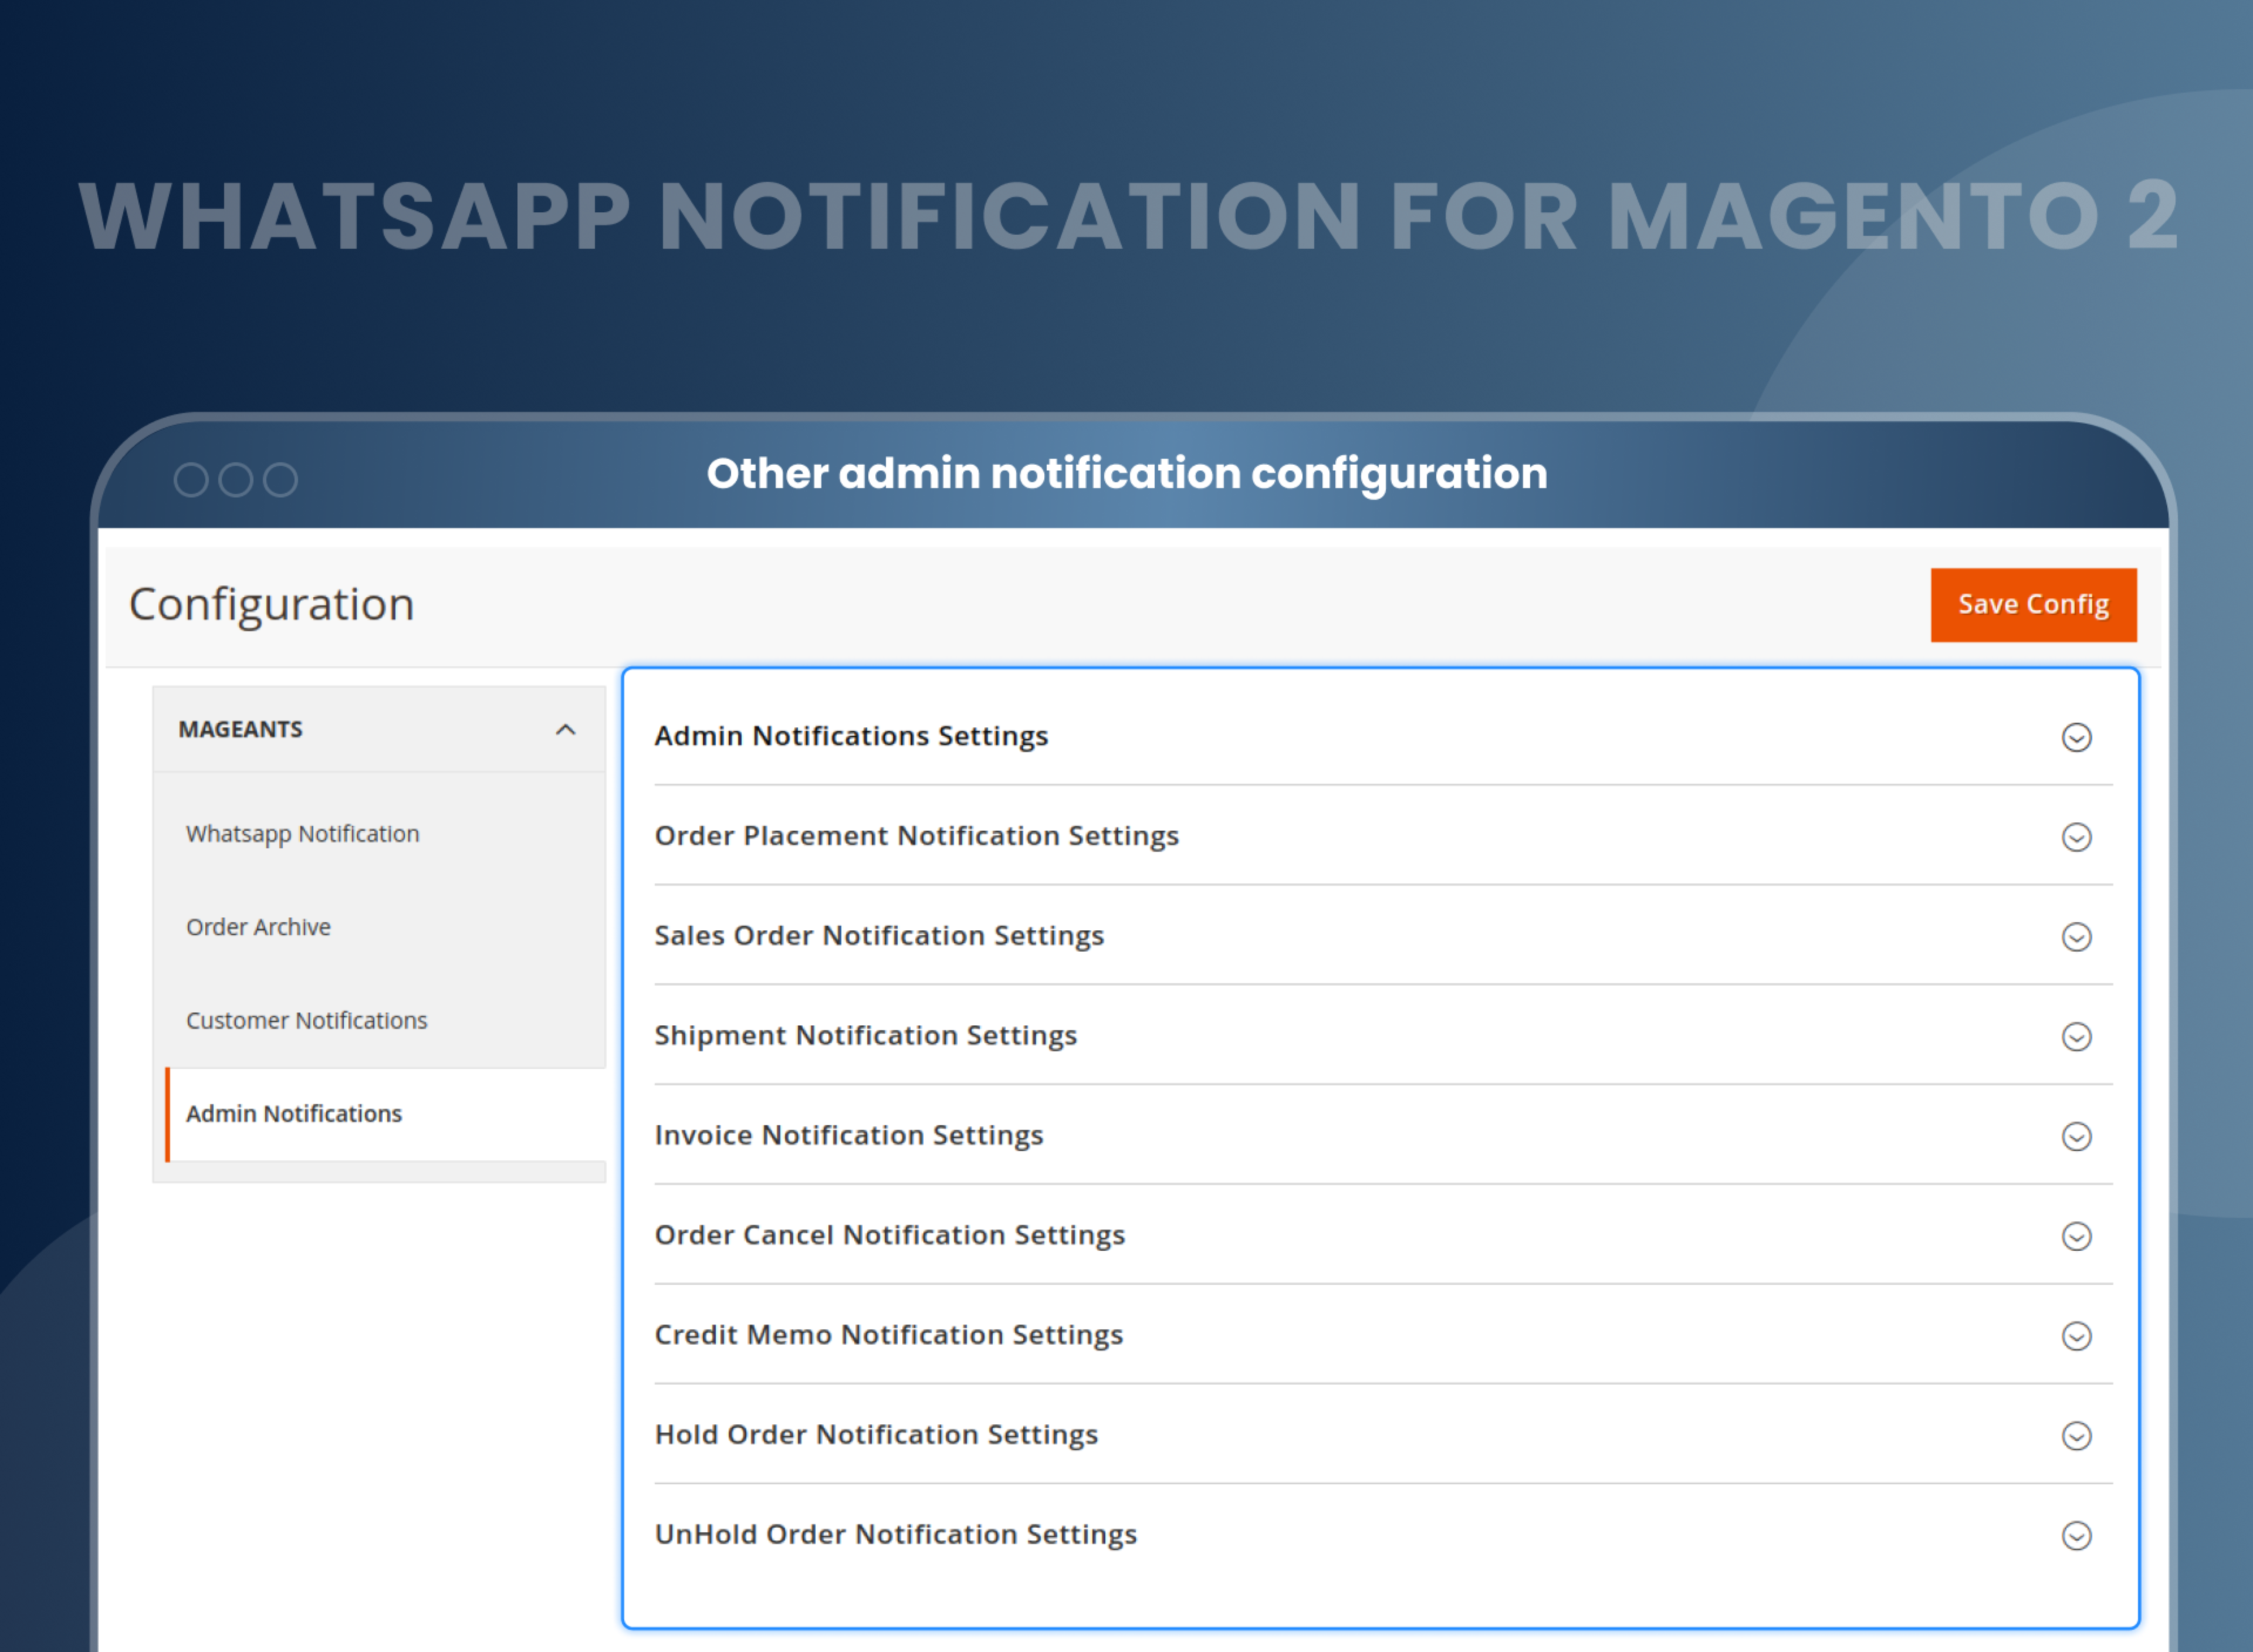 Other admin notification configuration